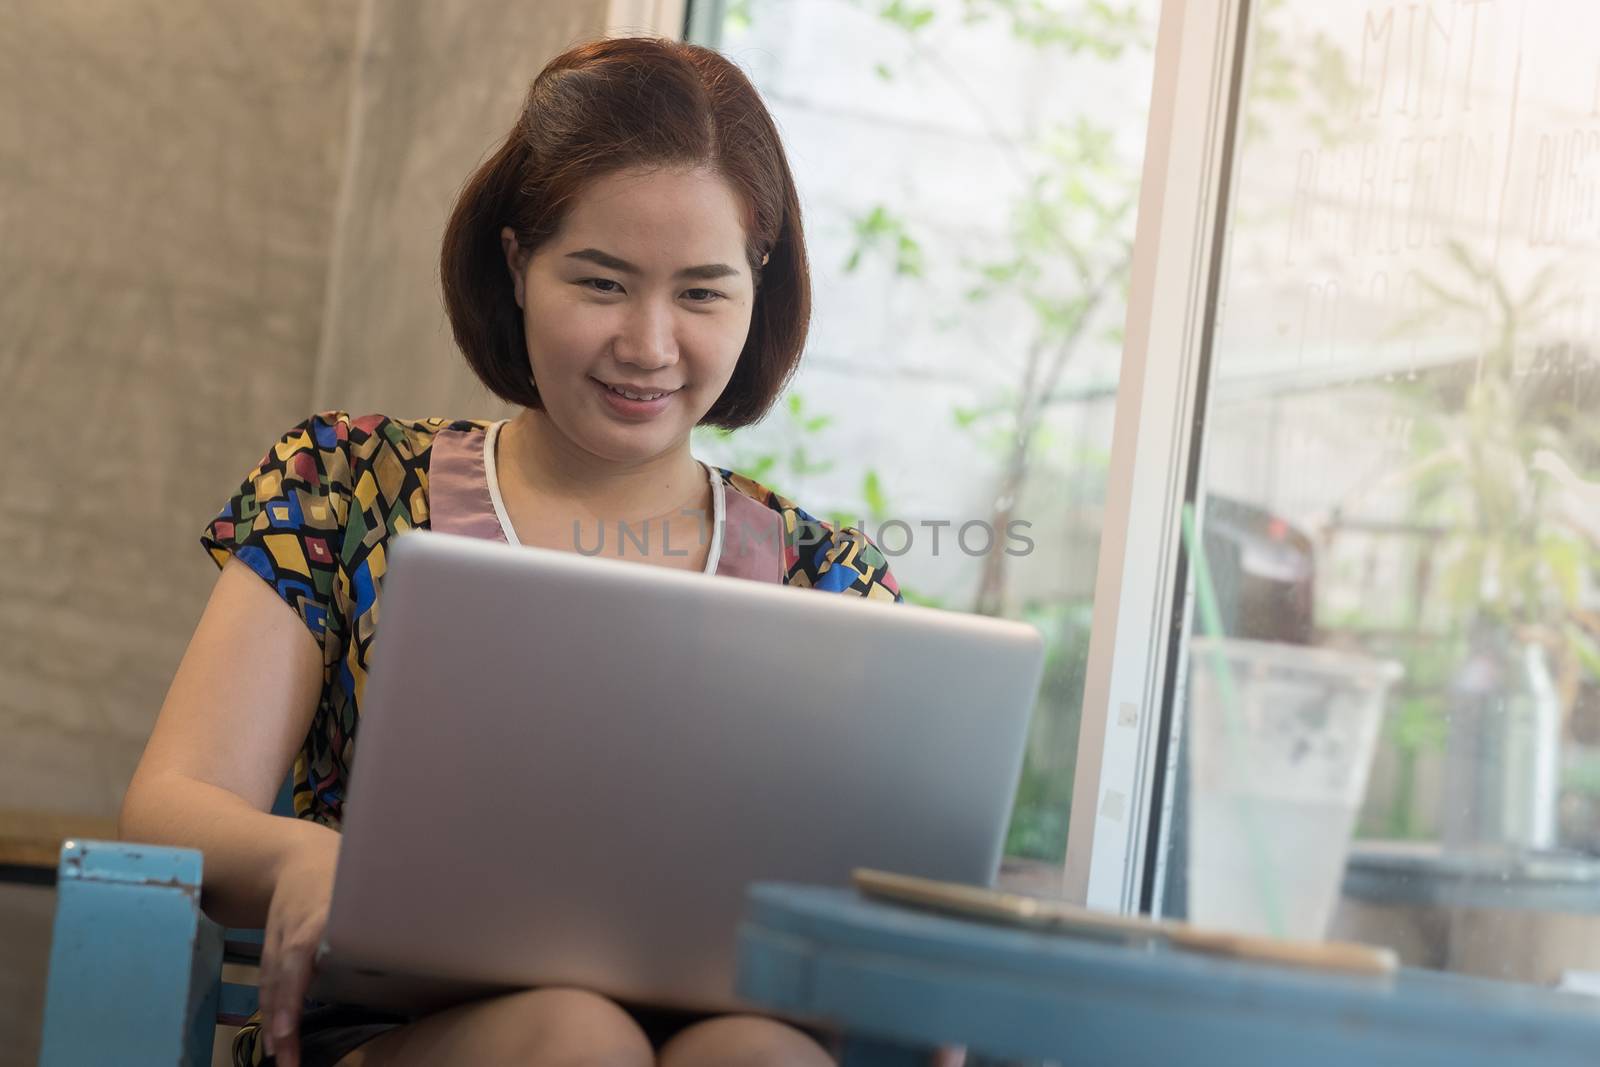 Young Asian woman working online at home with laptop computer. Freelance and outsource worker activity concept.